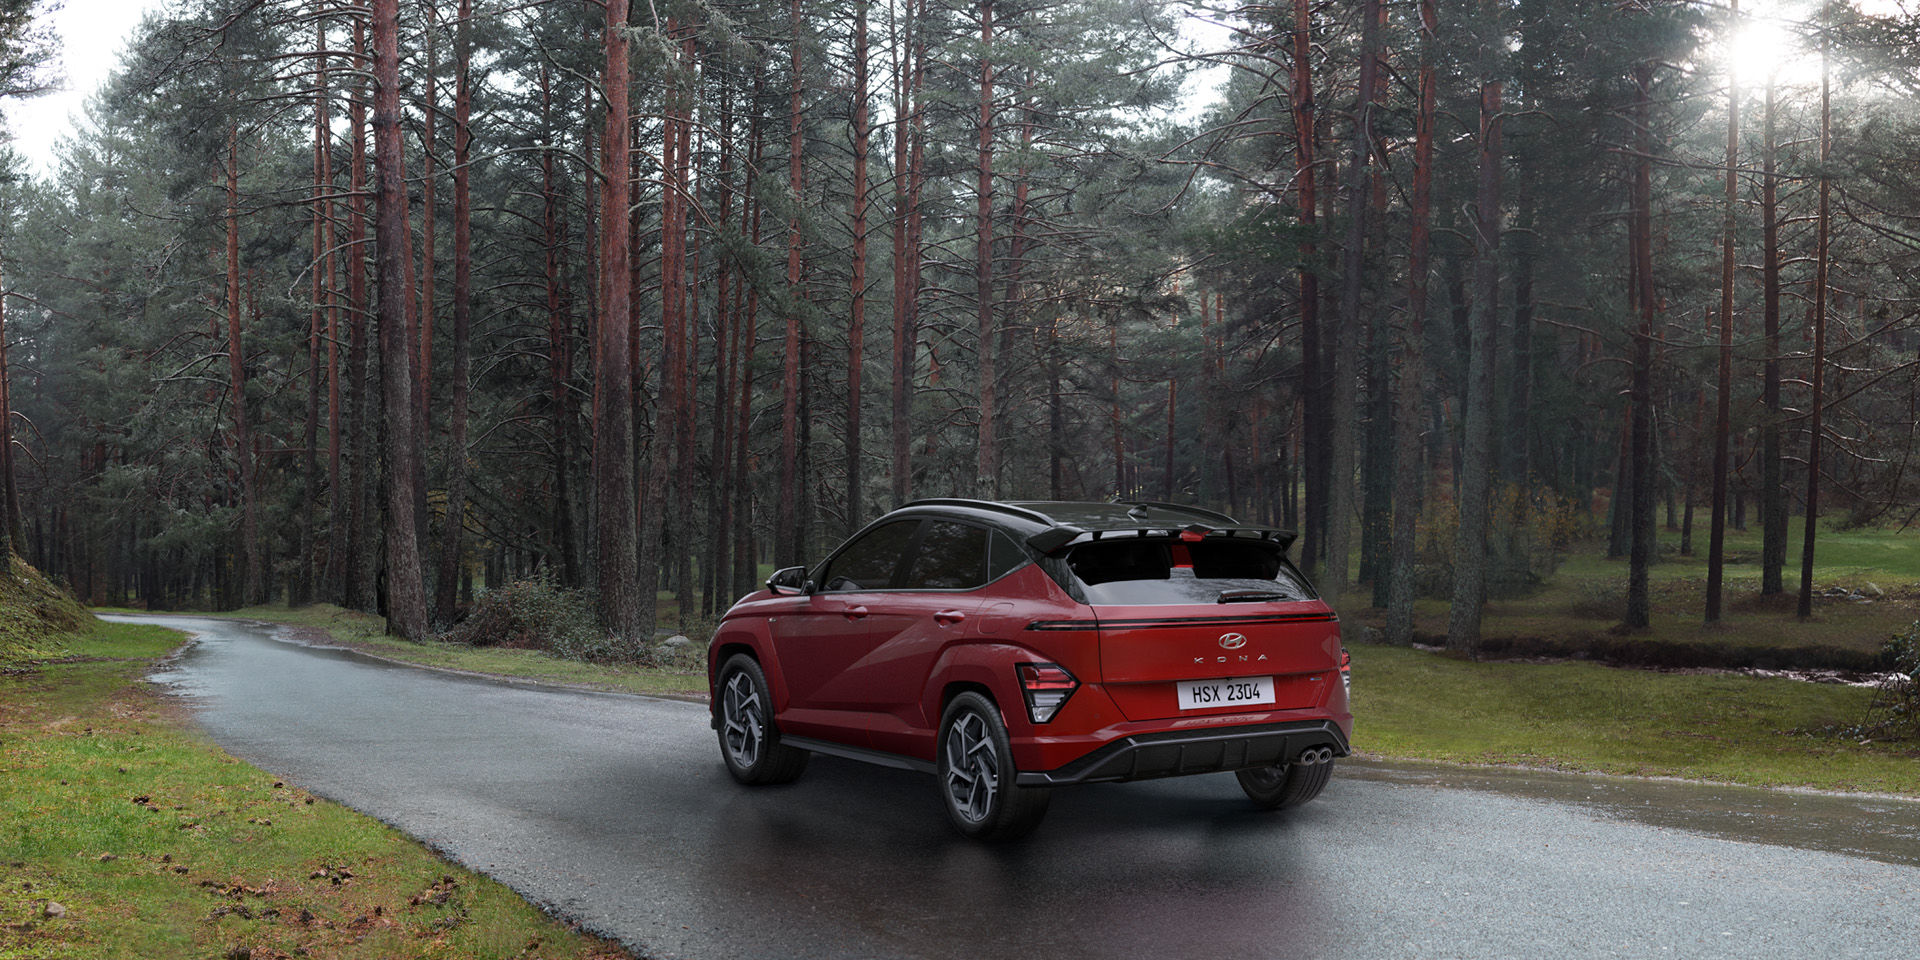 The back of a red The all-new KONA driving on a road in the forest